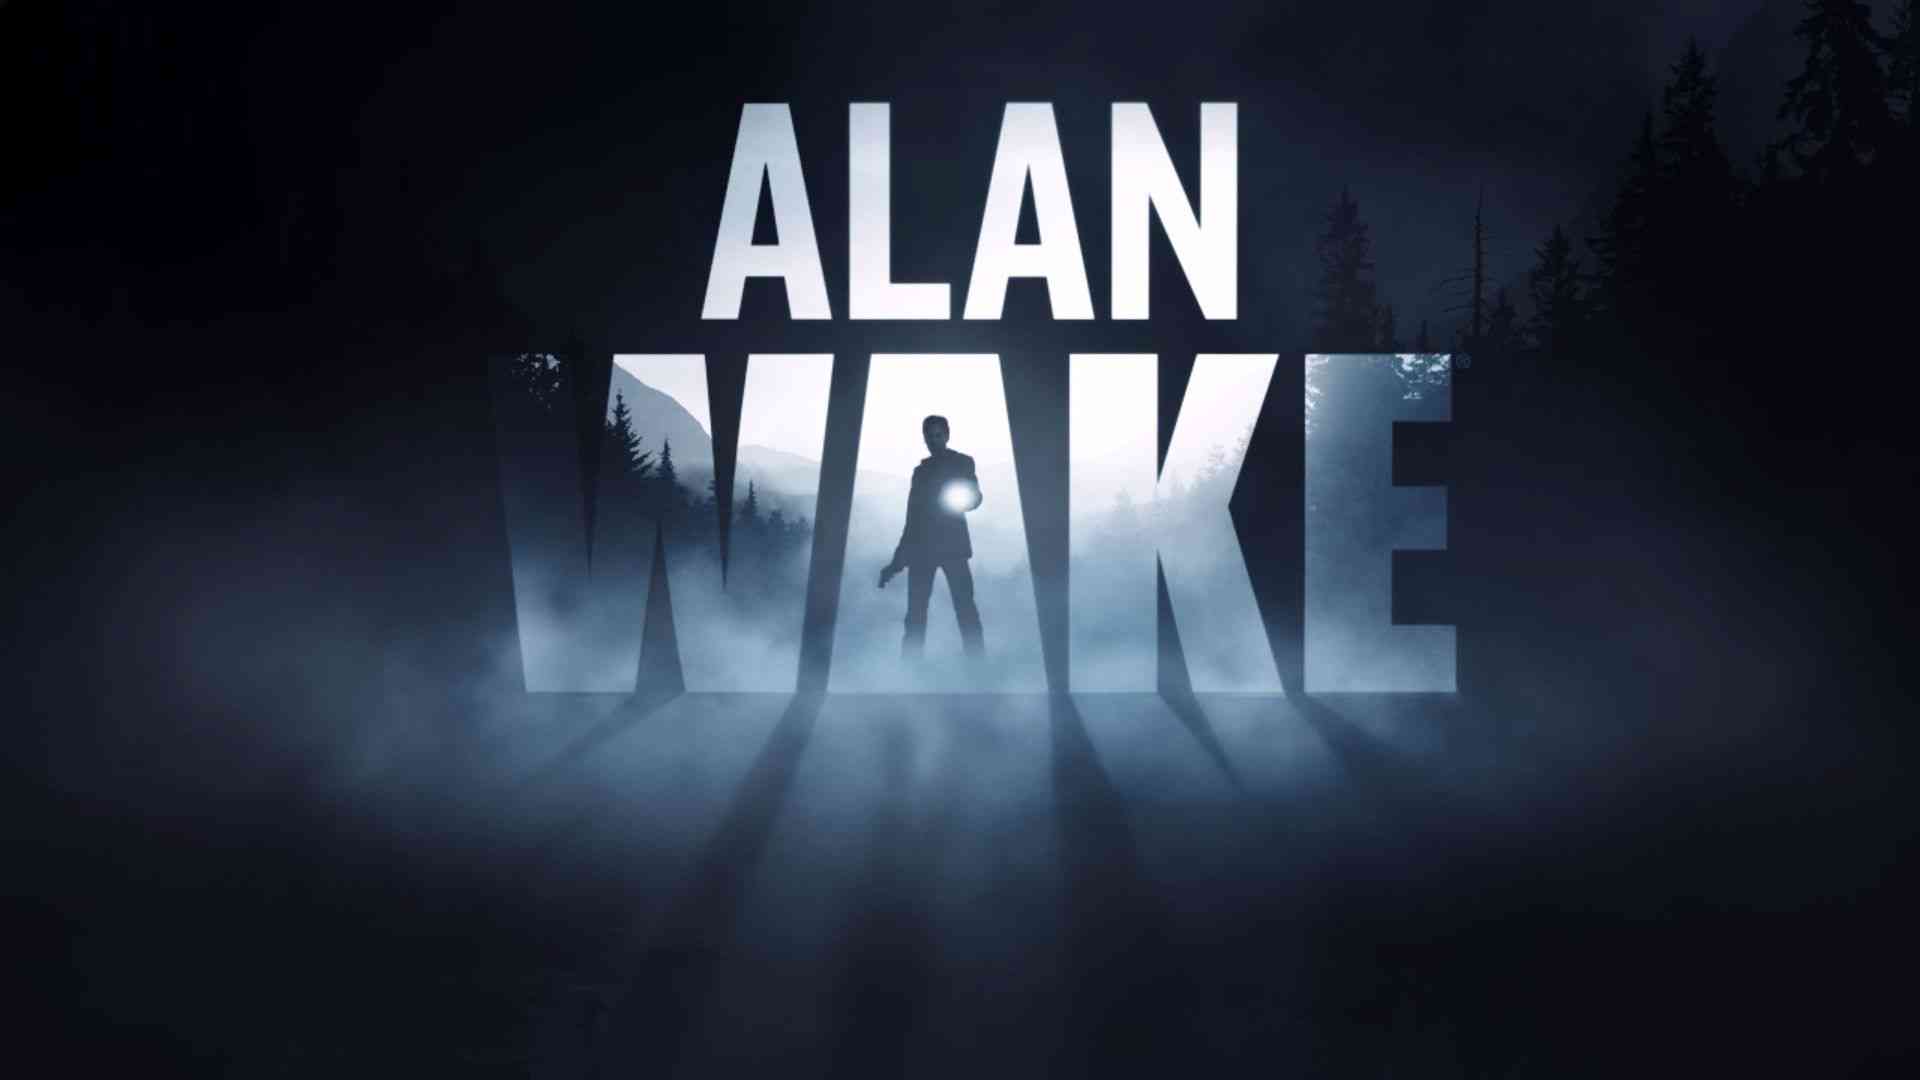 alan wake is becoming a tv show television producers are in shock big 1